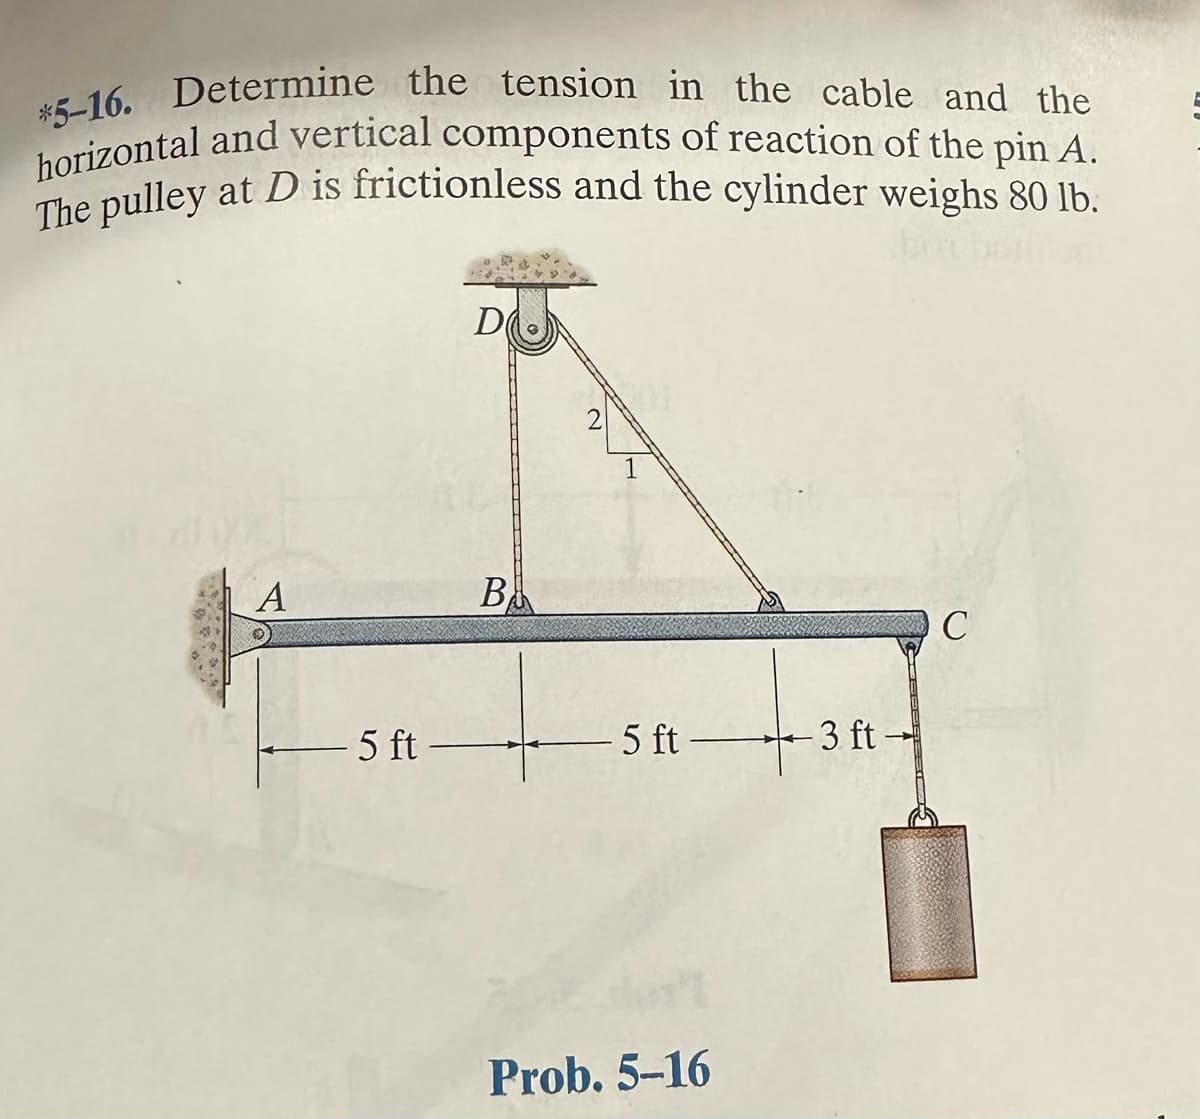 *5-16. Determine the tension in the cable and the
horizontal and vertical components of reaction of the pin A.
The pulley at D is frictionless and the cylinder weighs 80 lb.
A
5 ft-
D
B
2
5 ft 3 ft
Prob. 5-16
C